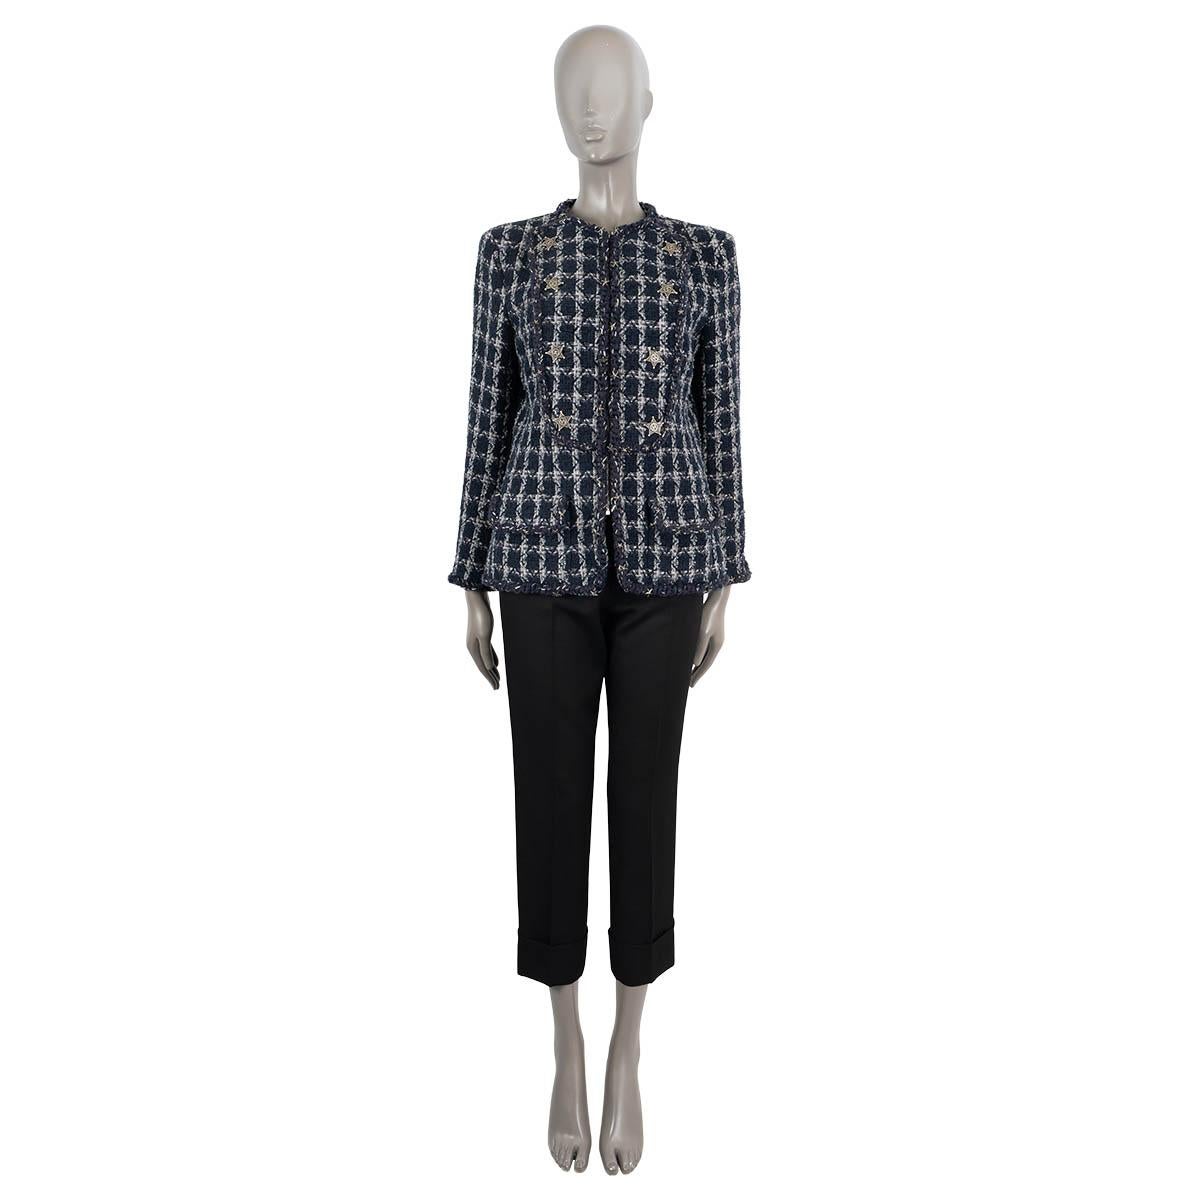 100% authentic Chanel collarless tweed jacket in navy blue, white, grey and black cotton (84%), wool (10%) and nylon (6%). Features a round neck, braided trims, star pins, a bib panel and two flap pockets. Closes with a concealed zipper on the